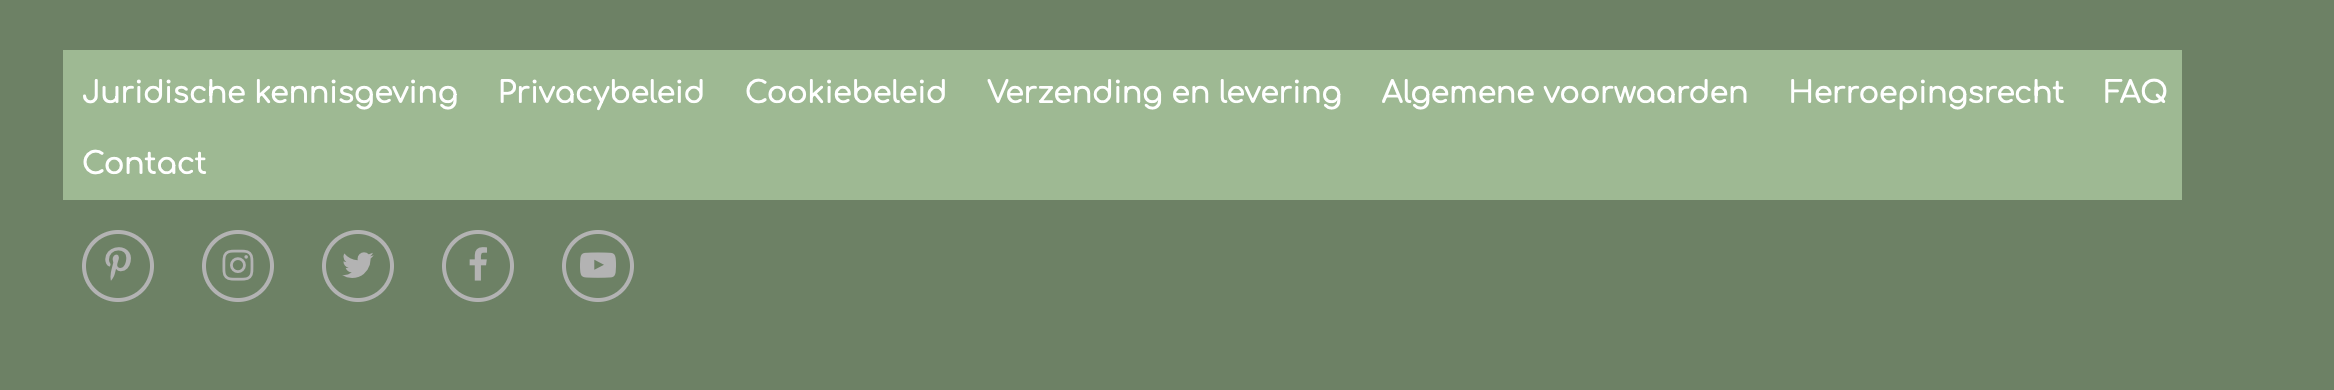 Footer_ShopView_NL.png